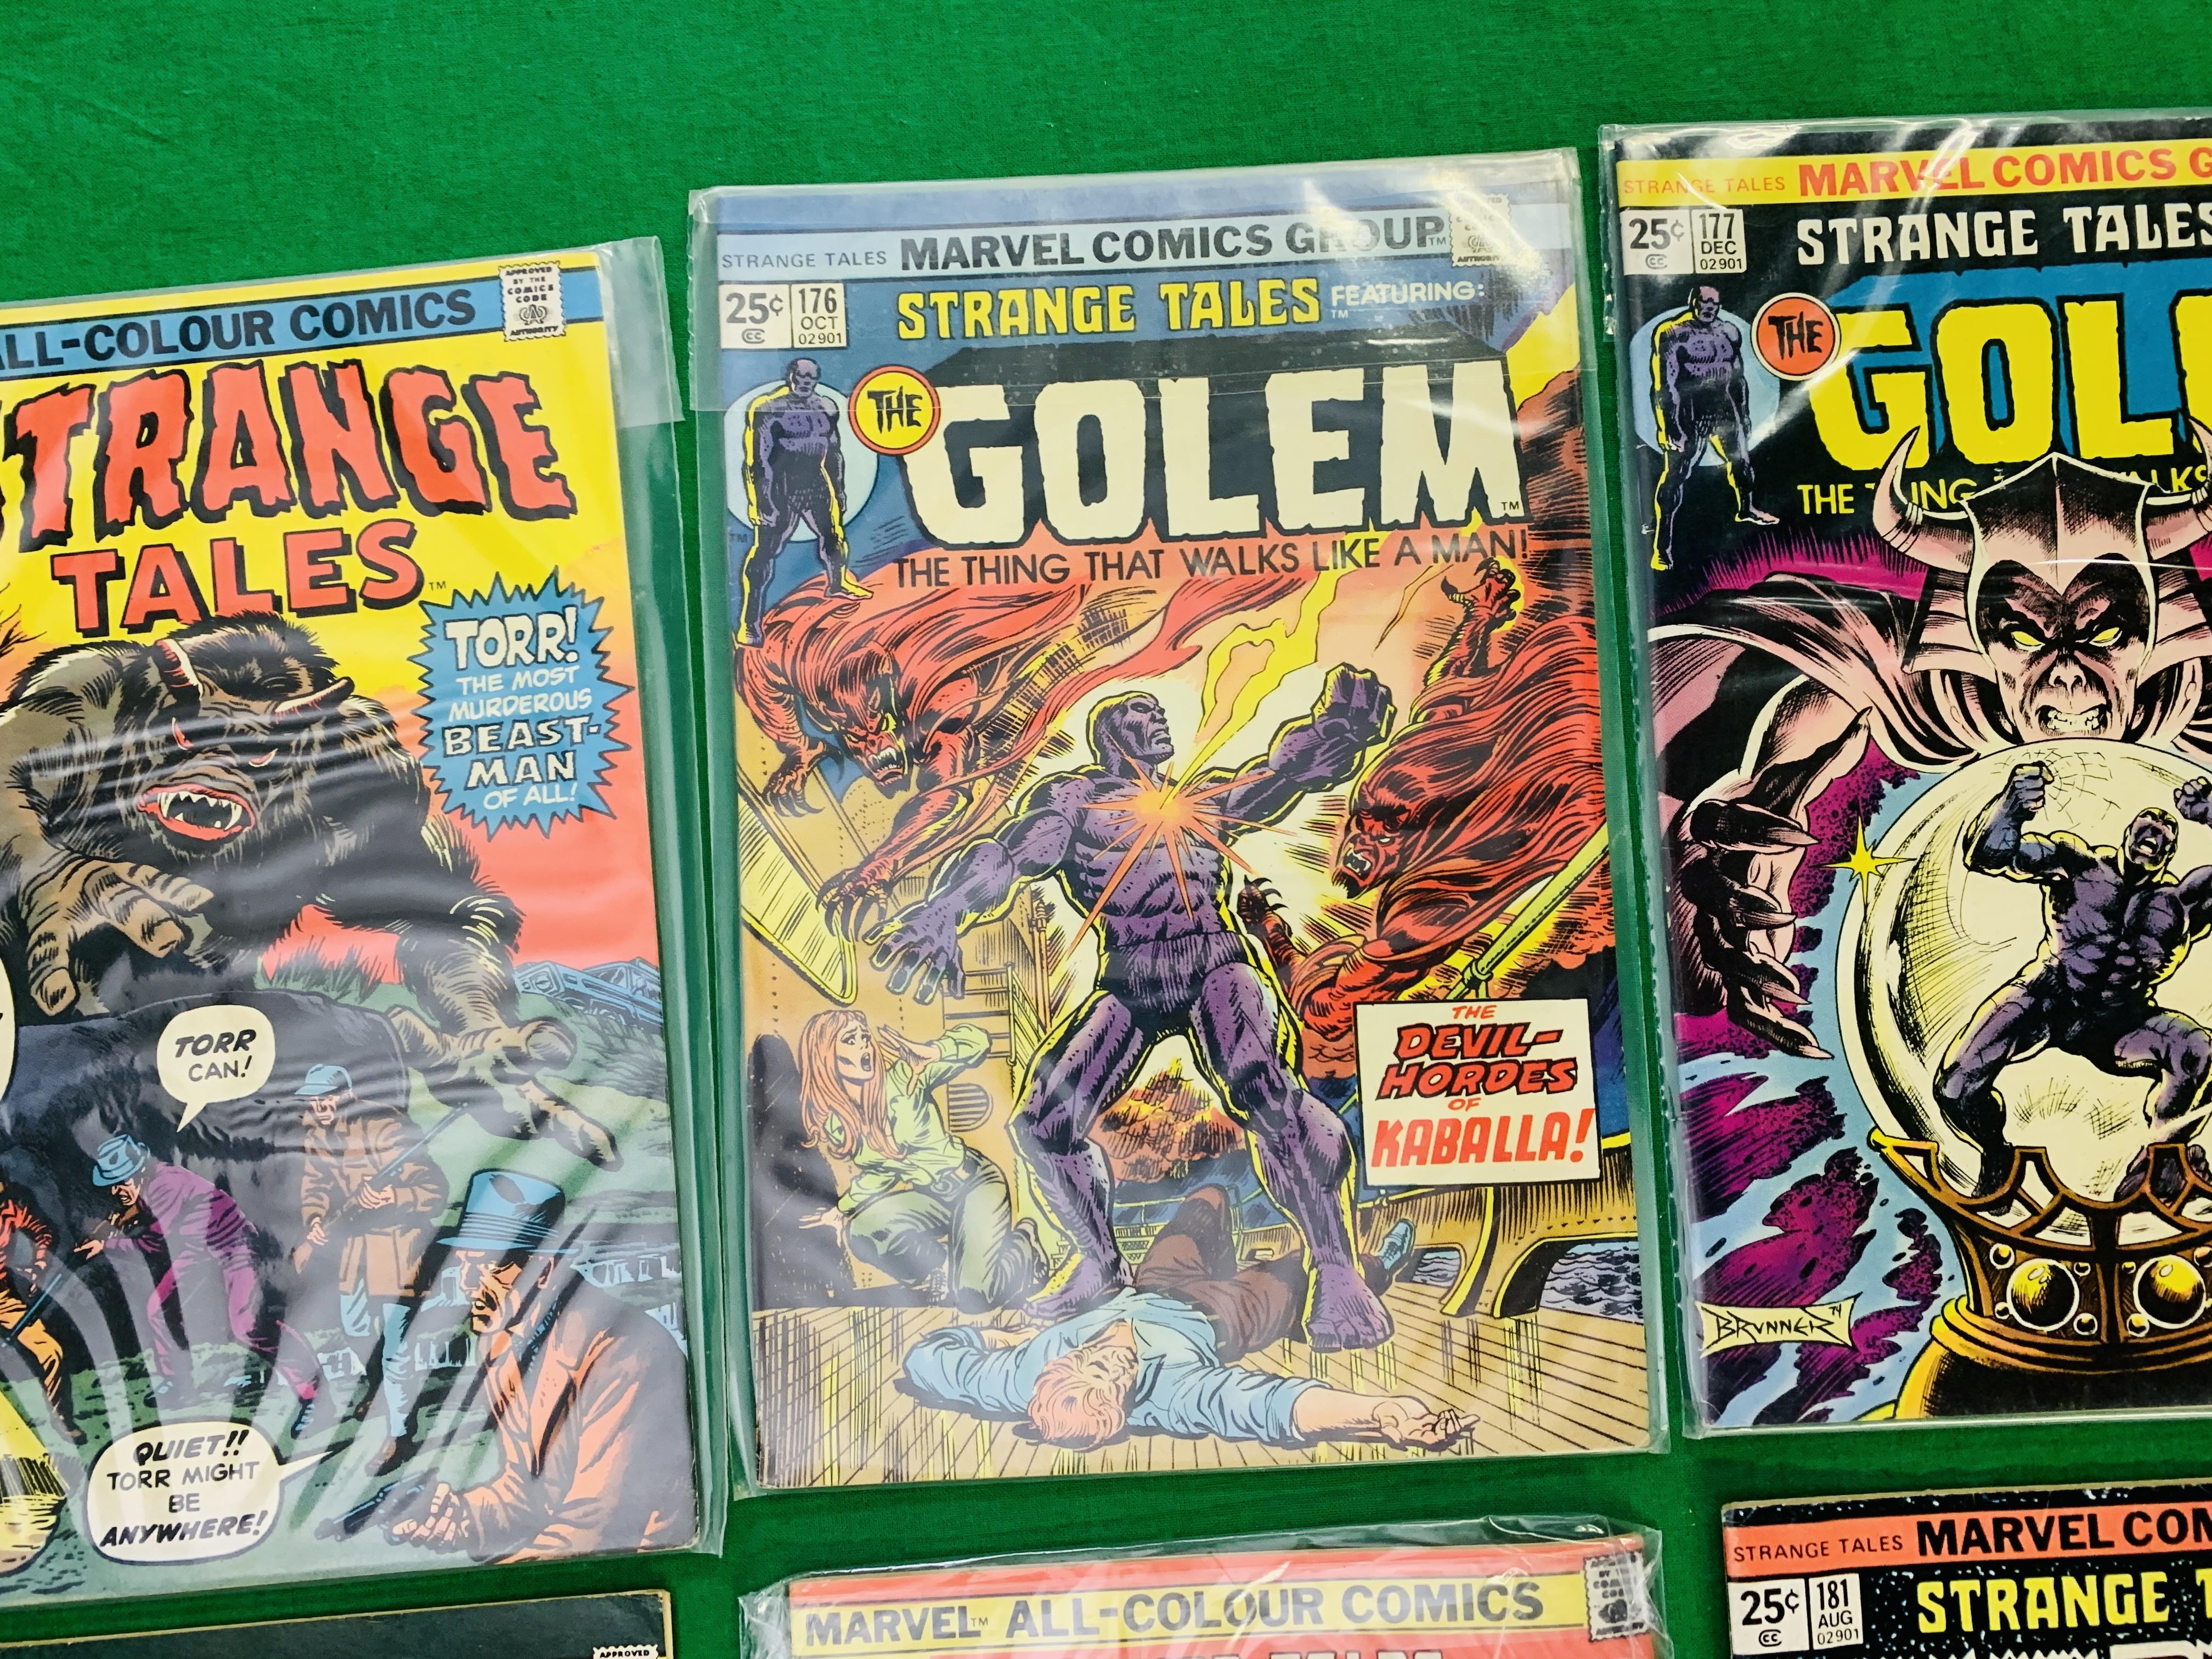 MARVEL STRANGE TALES, NO. 174 - 181, 184, 186. FROM 1974. NO. 178 IS THE FIRST APPEARANCE OF MAGNUS. - Image 4 of 11